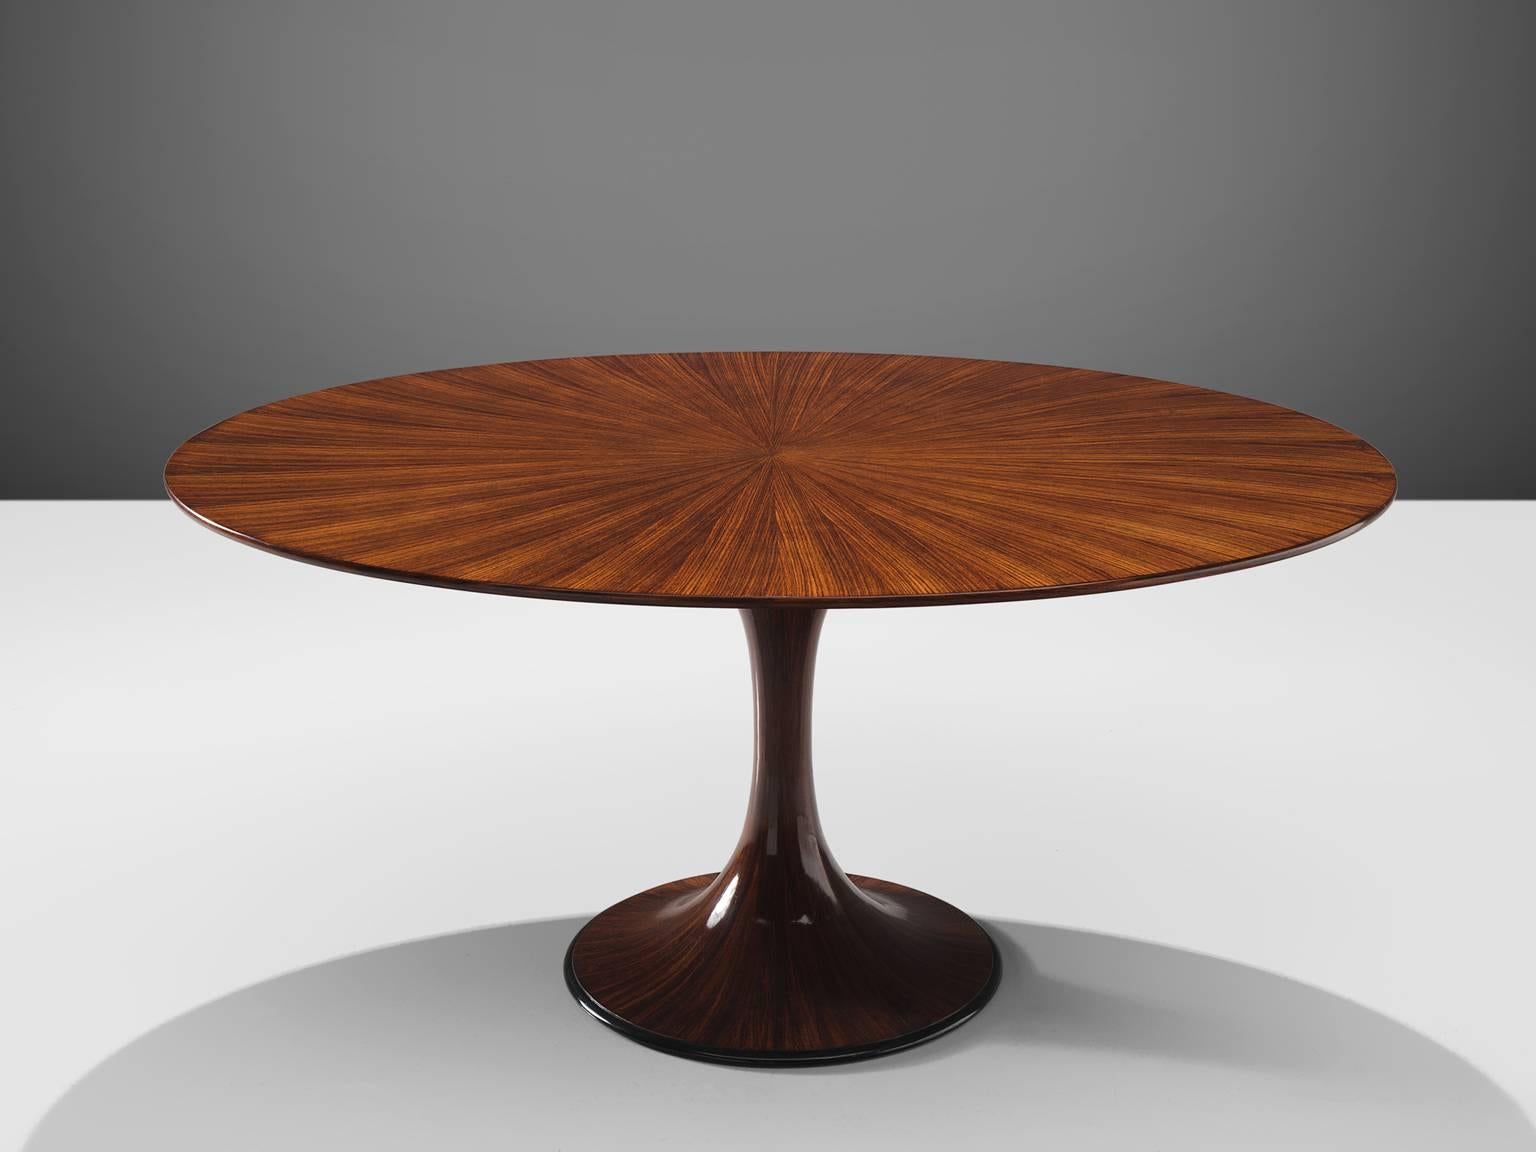 Luigi Massoni, Oval dining table, rosewood, Italy, ca. 1950.

This oval table features a slim, soft sculptural foot. The pattern in this table is created by placing several plain sawn pieces in a star form. Thanks to this nifty woodwork a layered